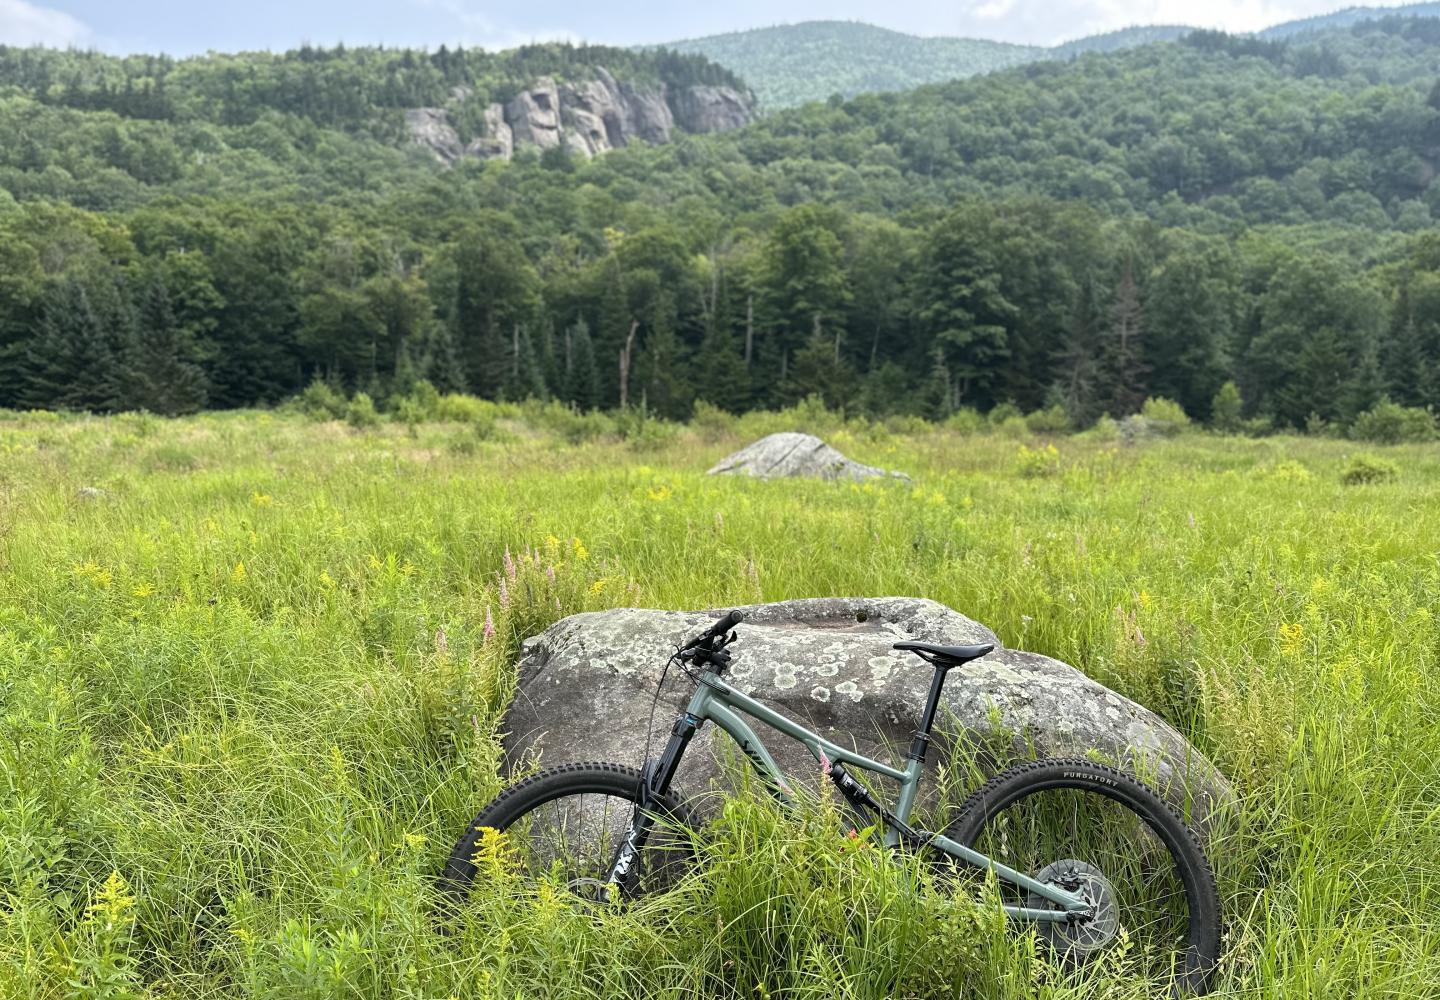 We're imagining more ways to travel off-road in the Adirondacks by bike. 